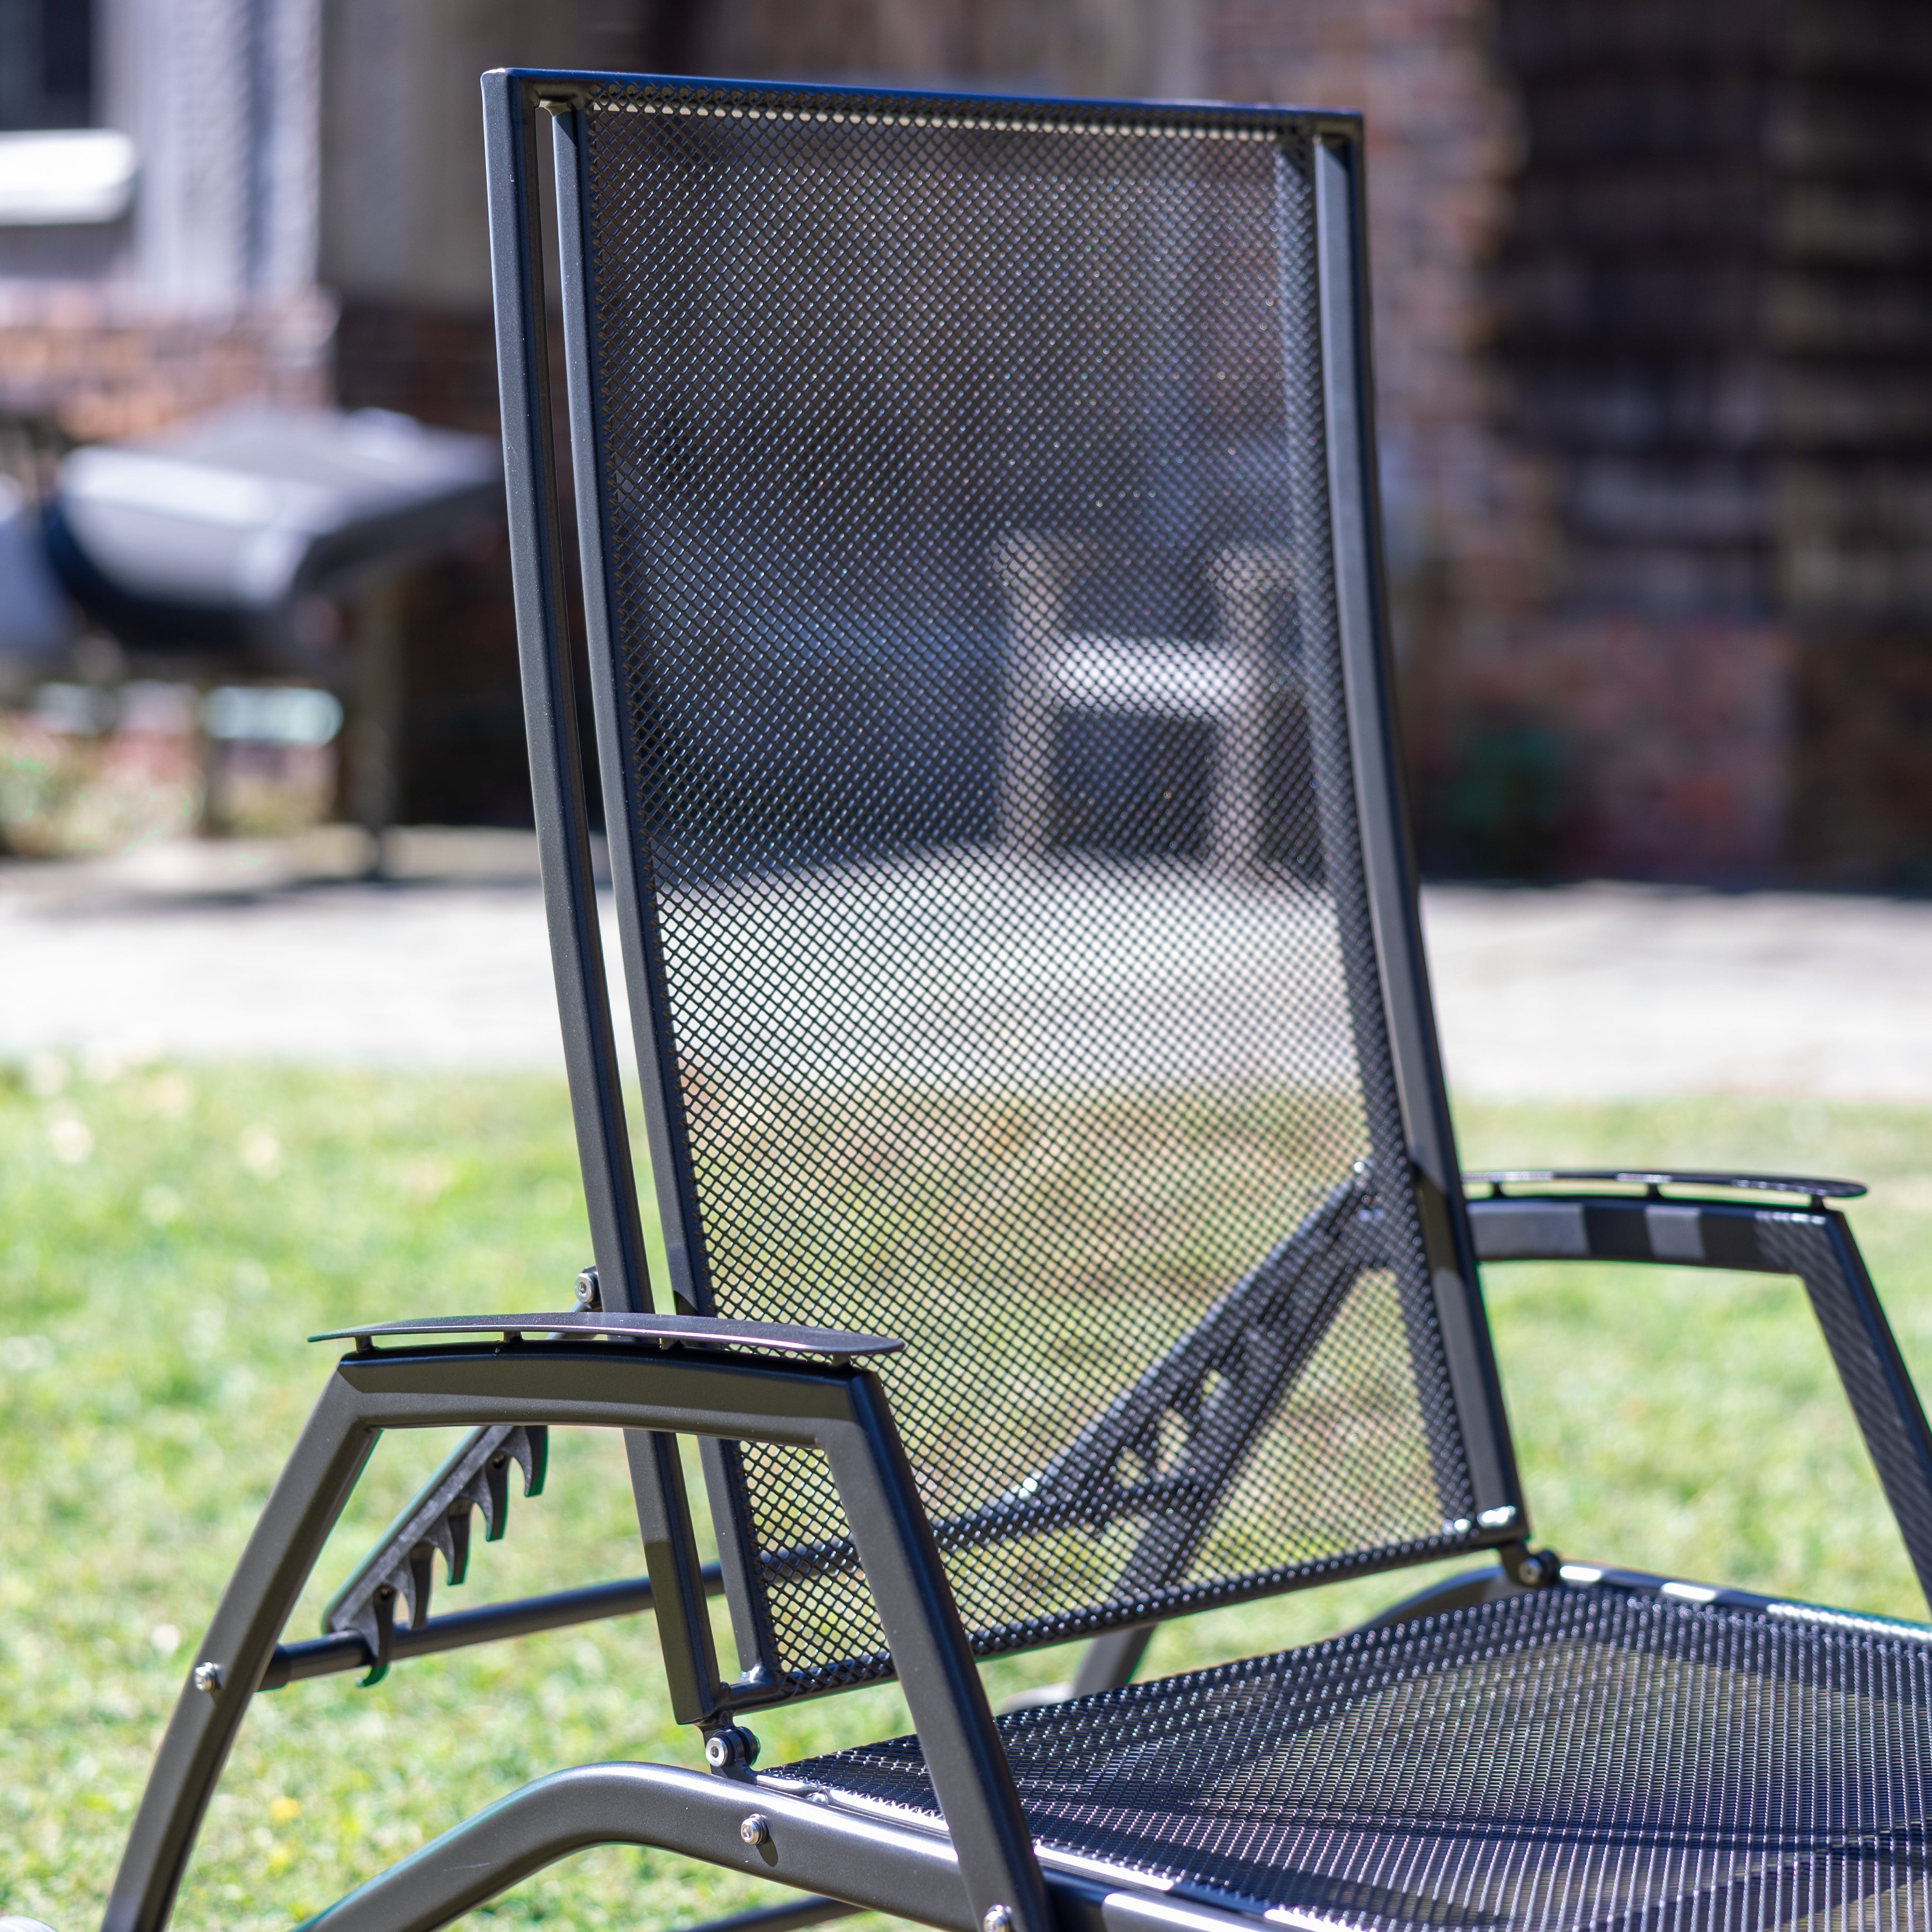 Sit back and relax under the sun on the Henley Lounger providing absolute comfort. Made from KETTLER’s durable mesh material, the Henley Lounger stays strong, withstanding season after season.